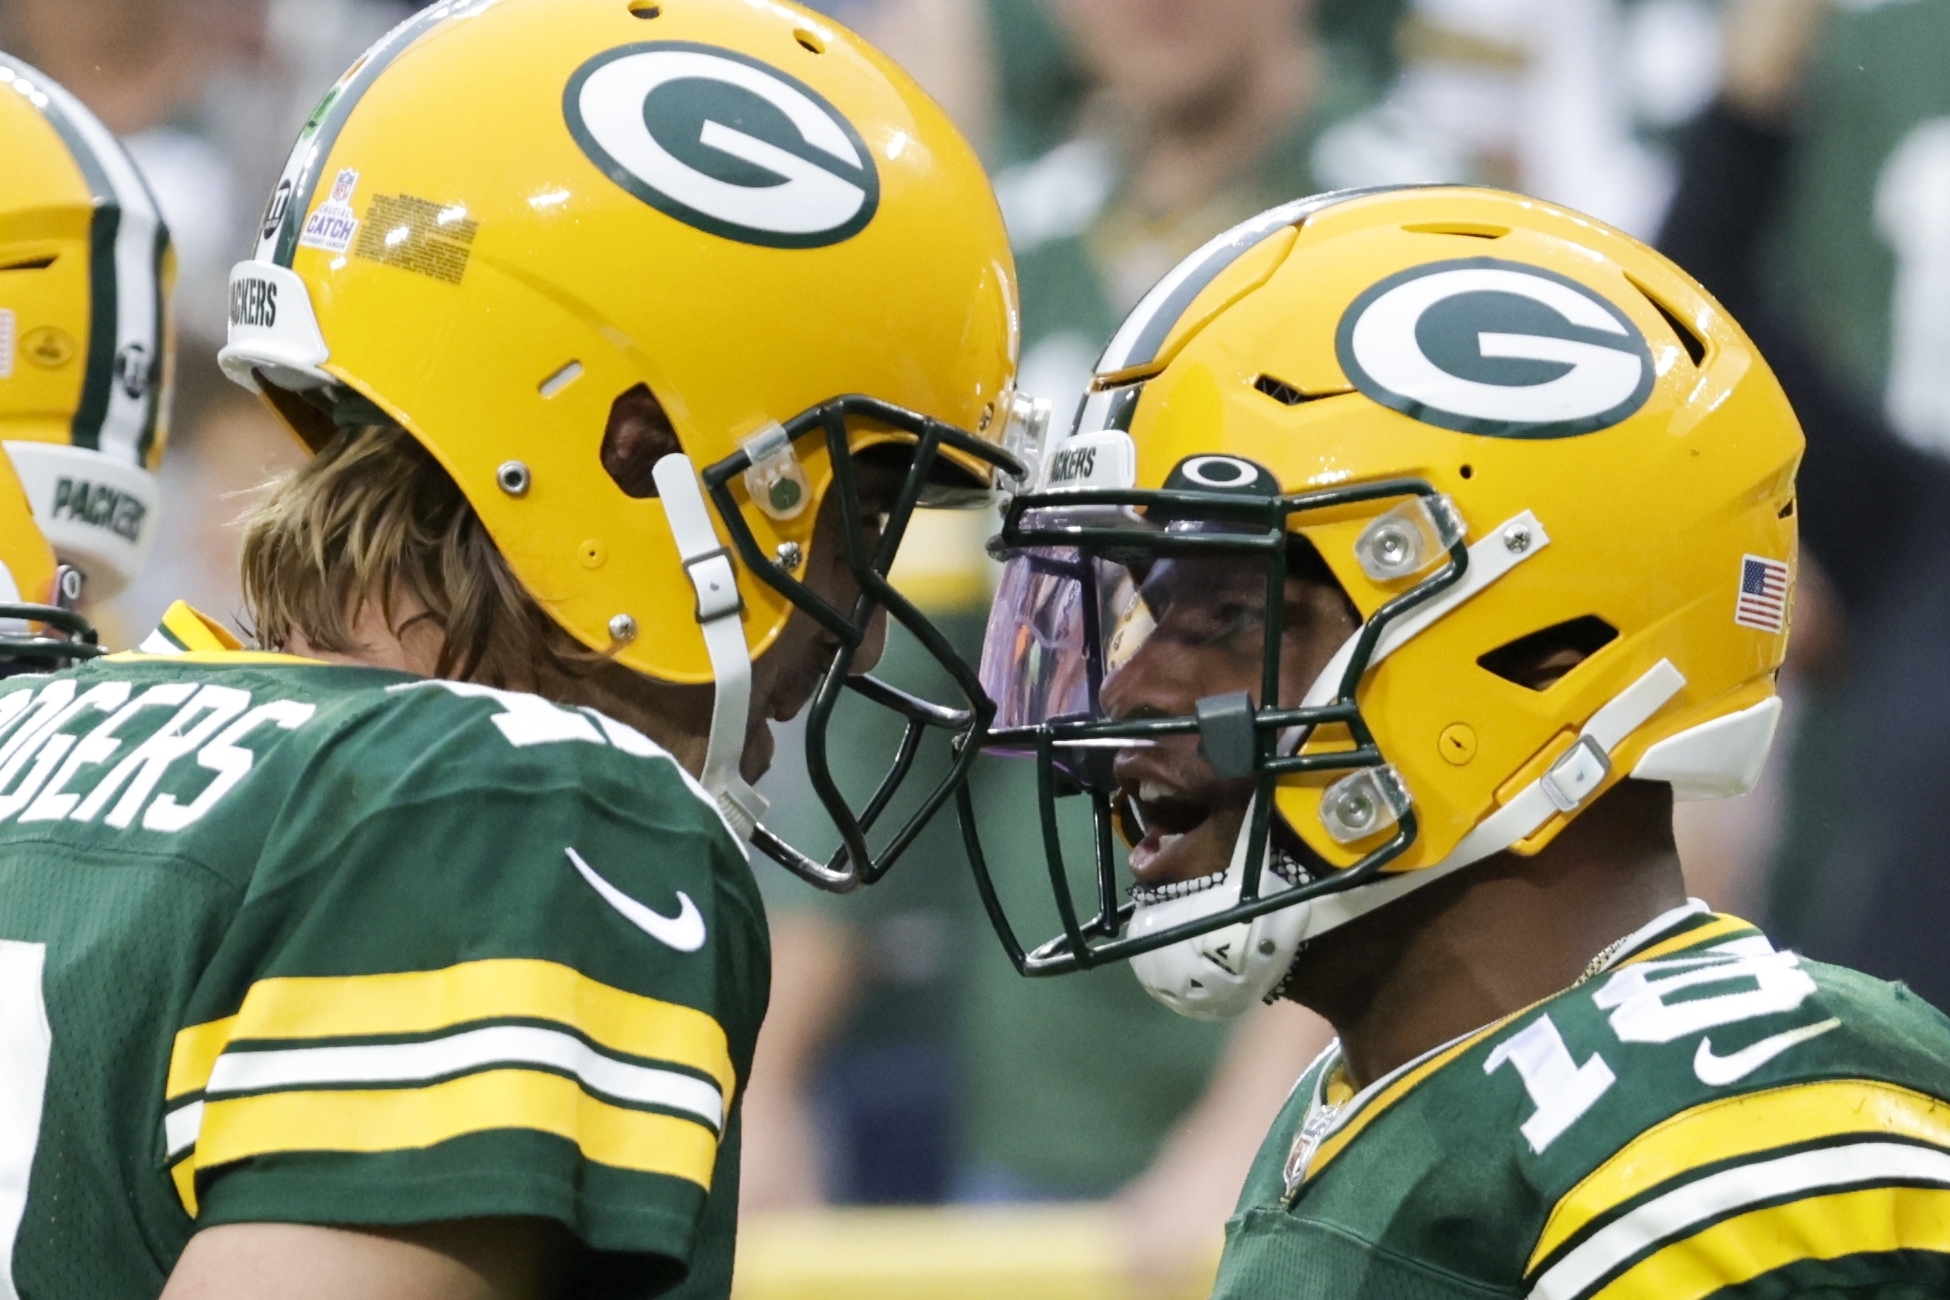 Rodgers to Cobb brings back a timeless connection